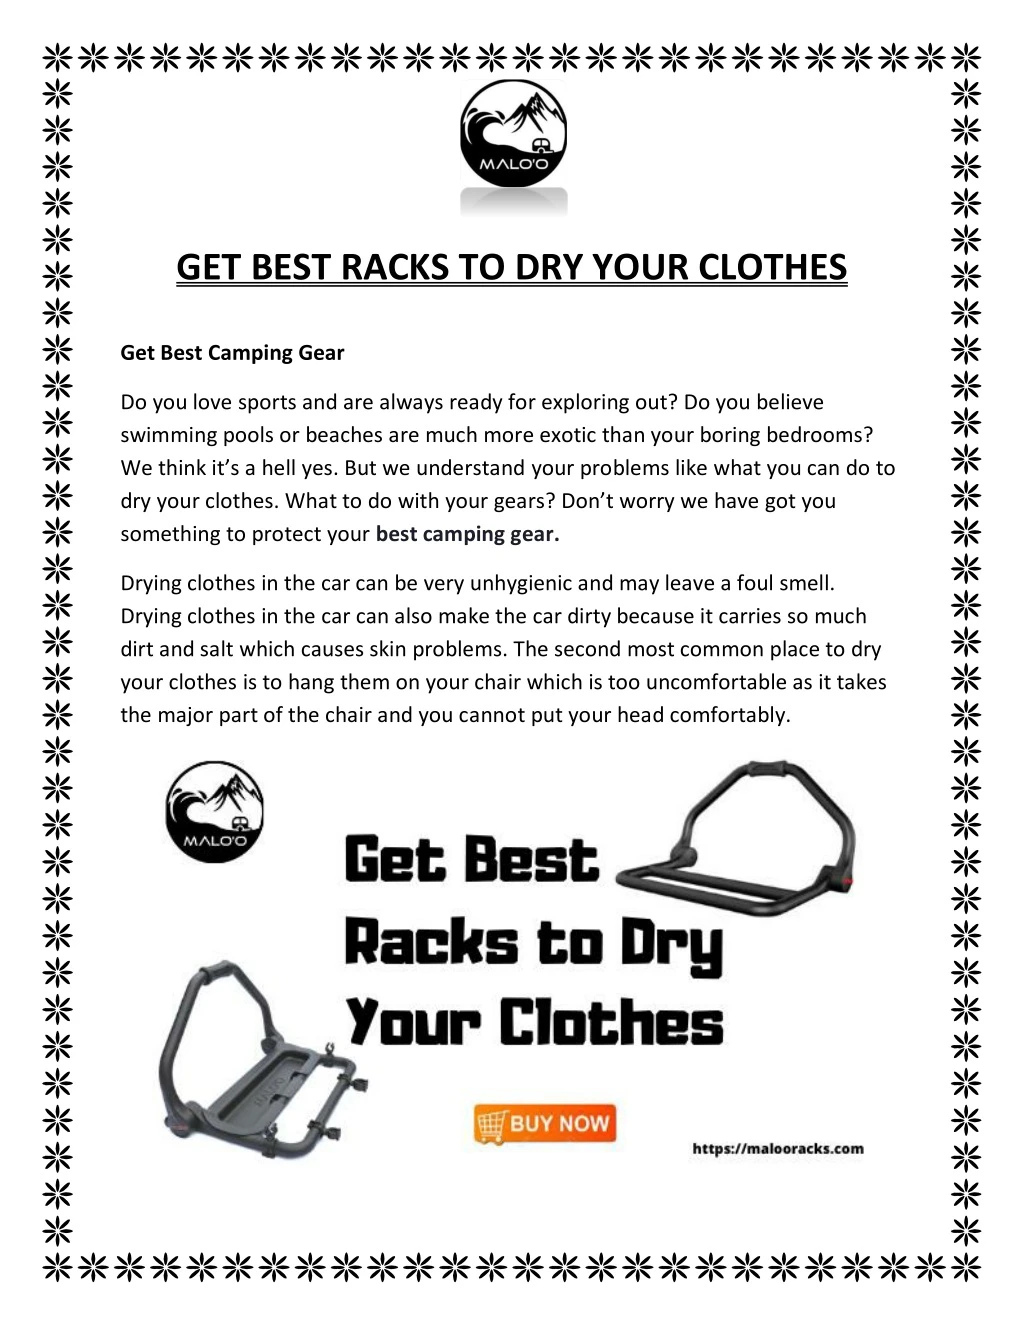 get best racks to dry your clothes